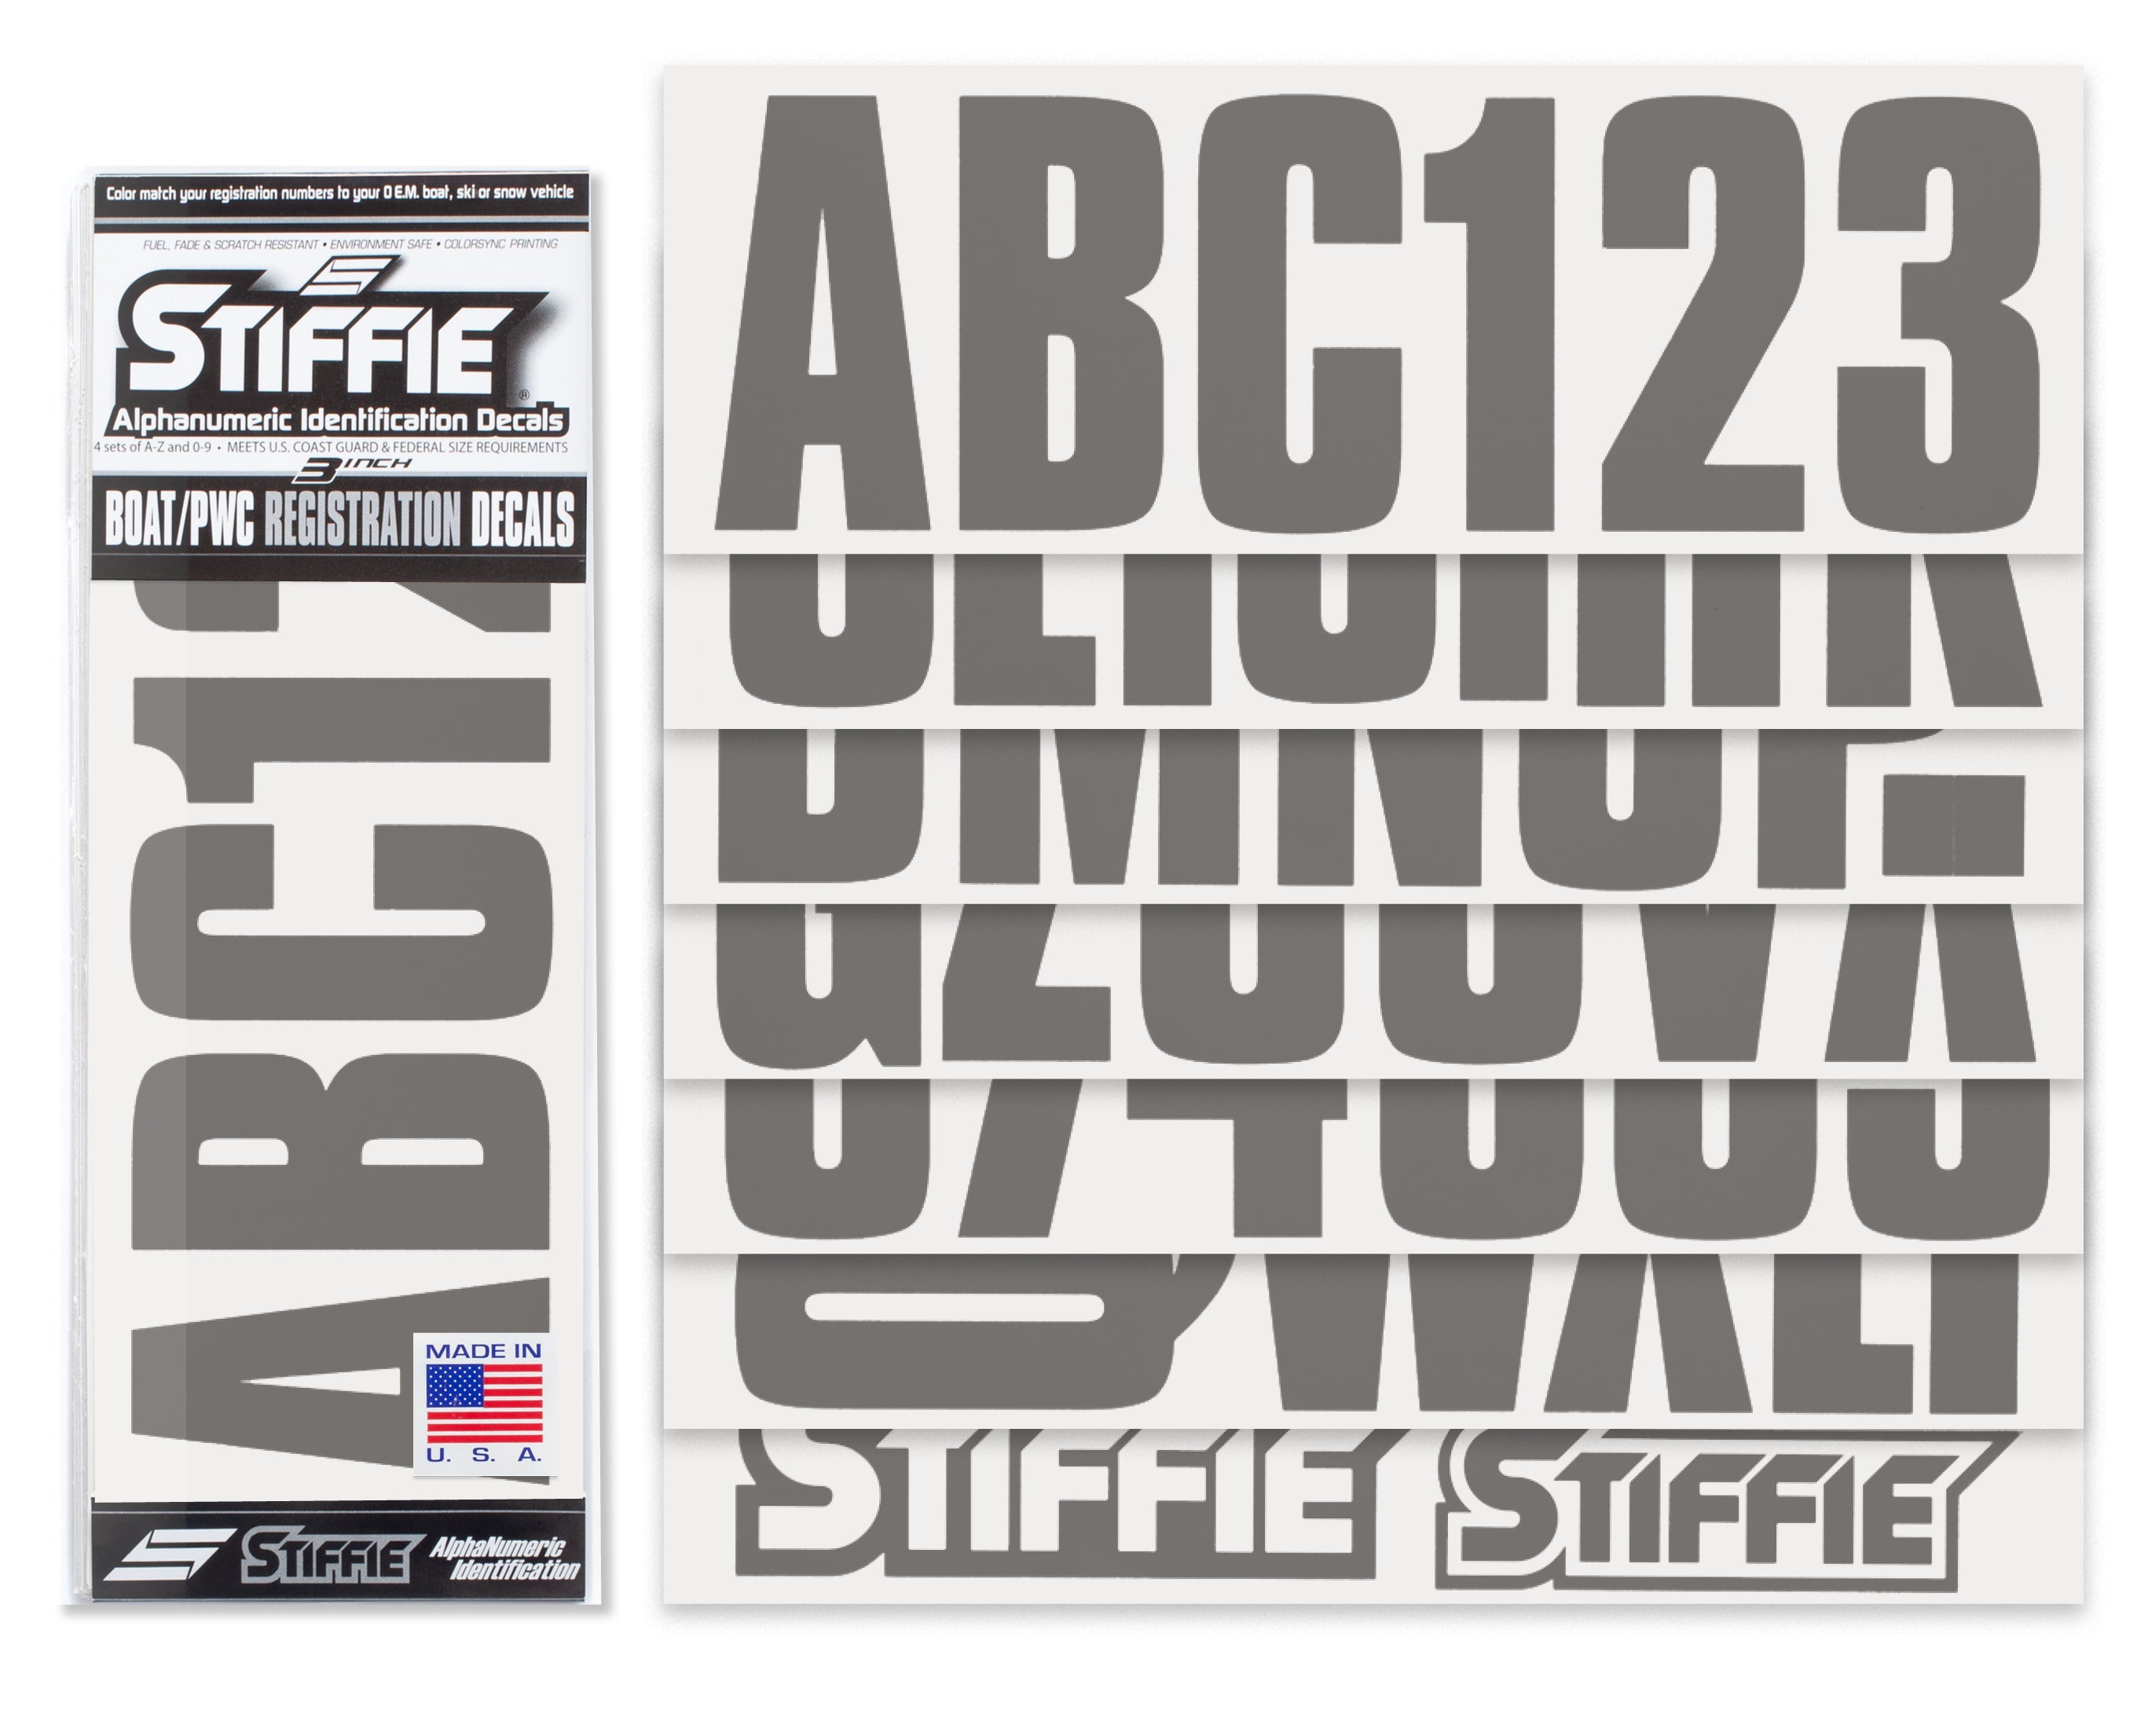 STIFFIE Uniline Carbon 3" ID Kit Alpha-Numeric Registration Identification Numbers Stickers Decals for Boats & Personal Watercraft